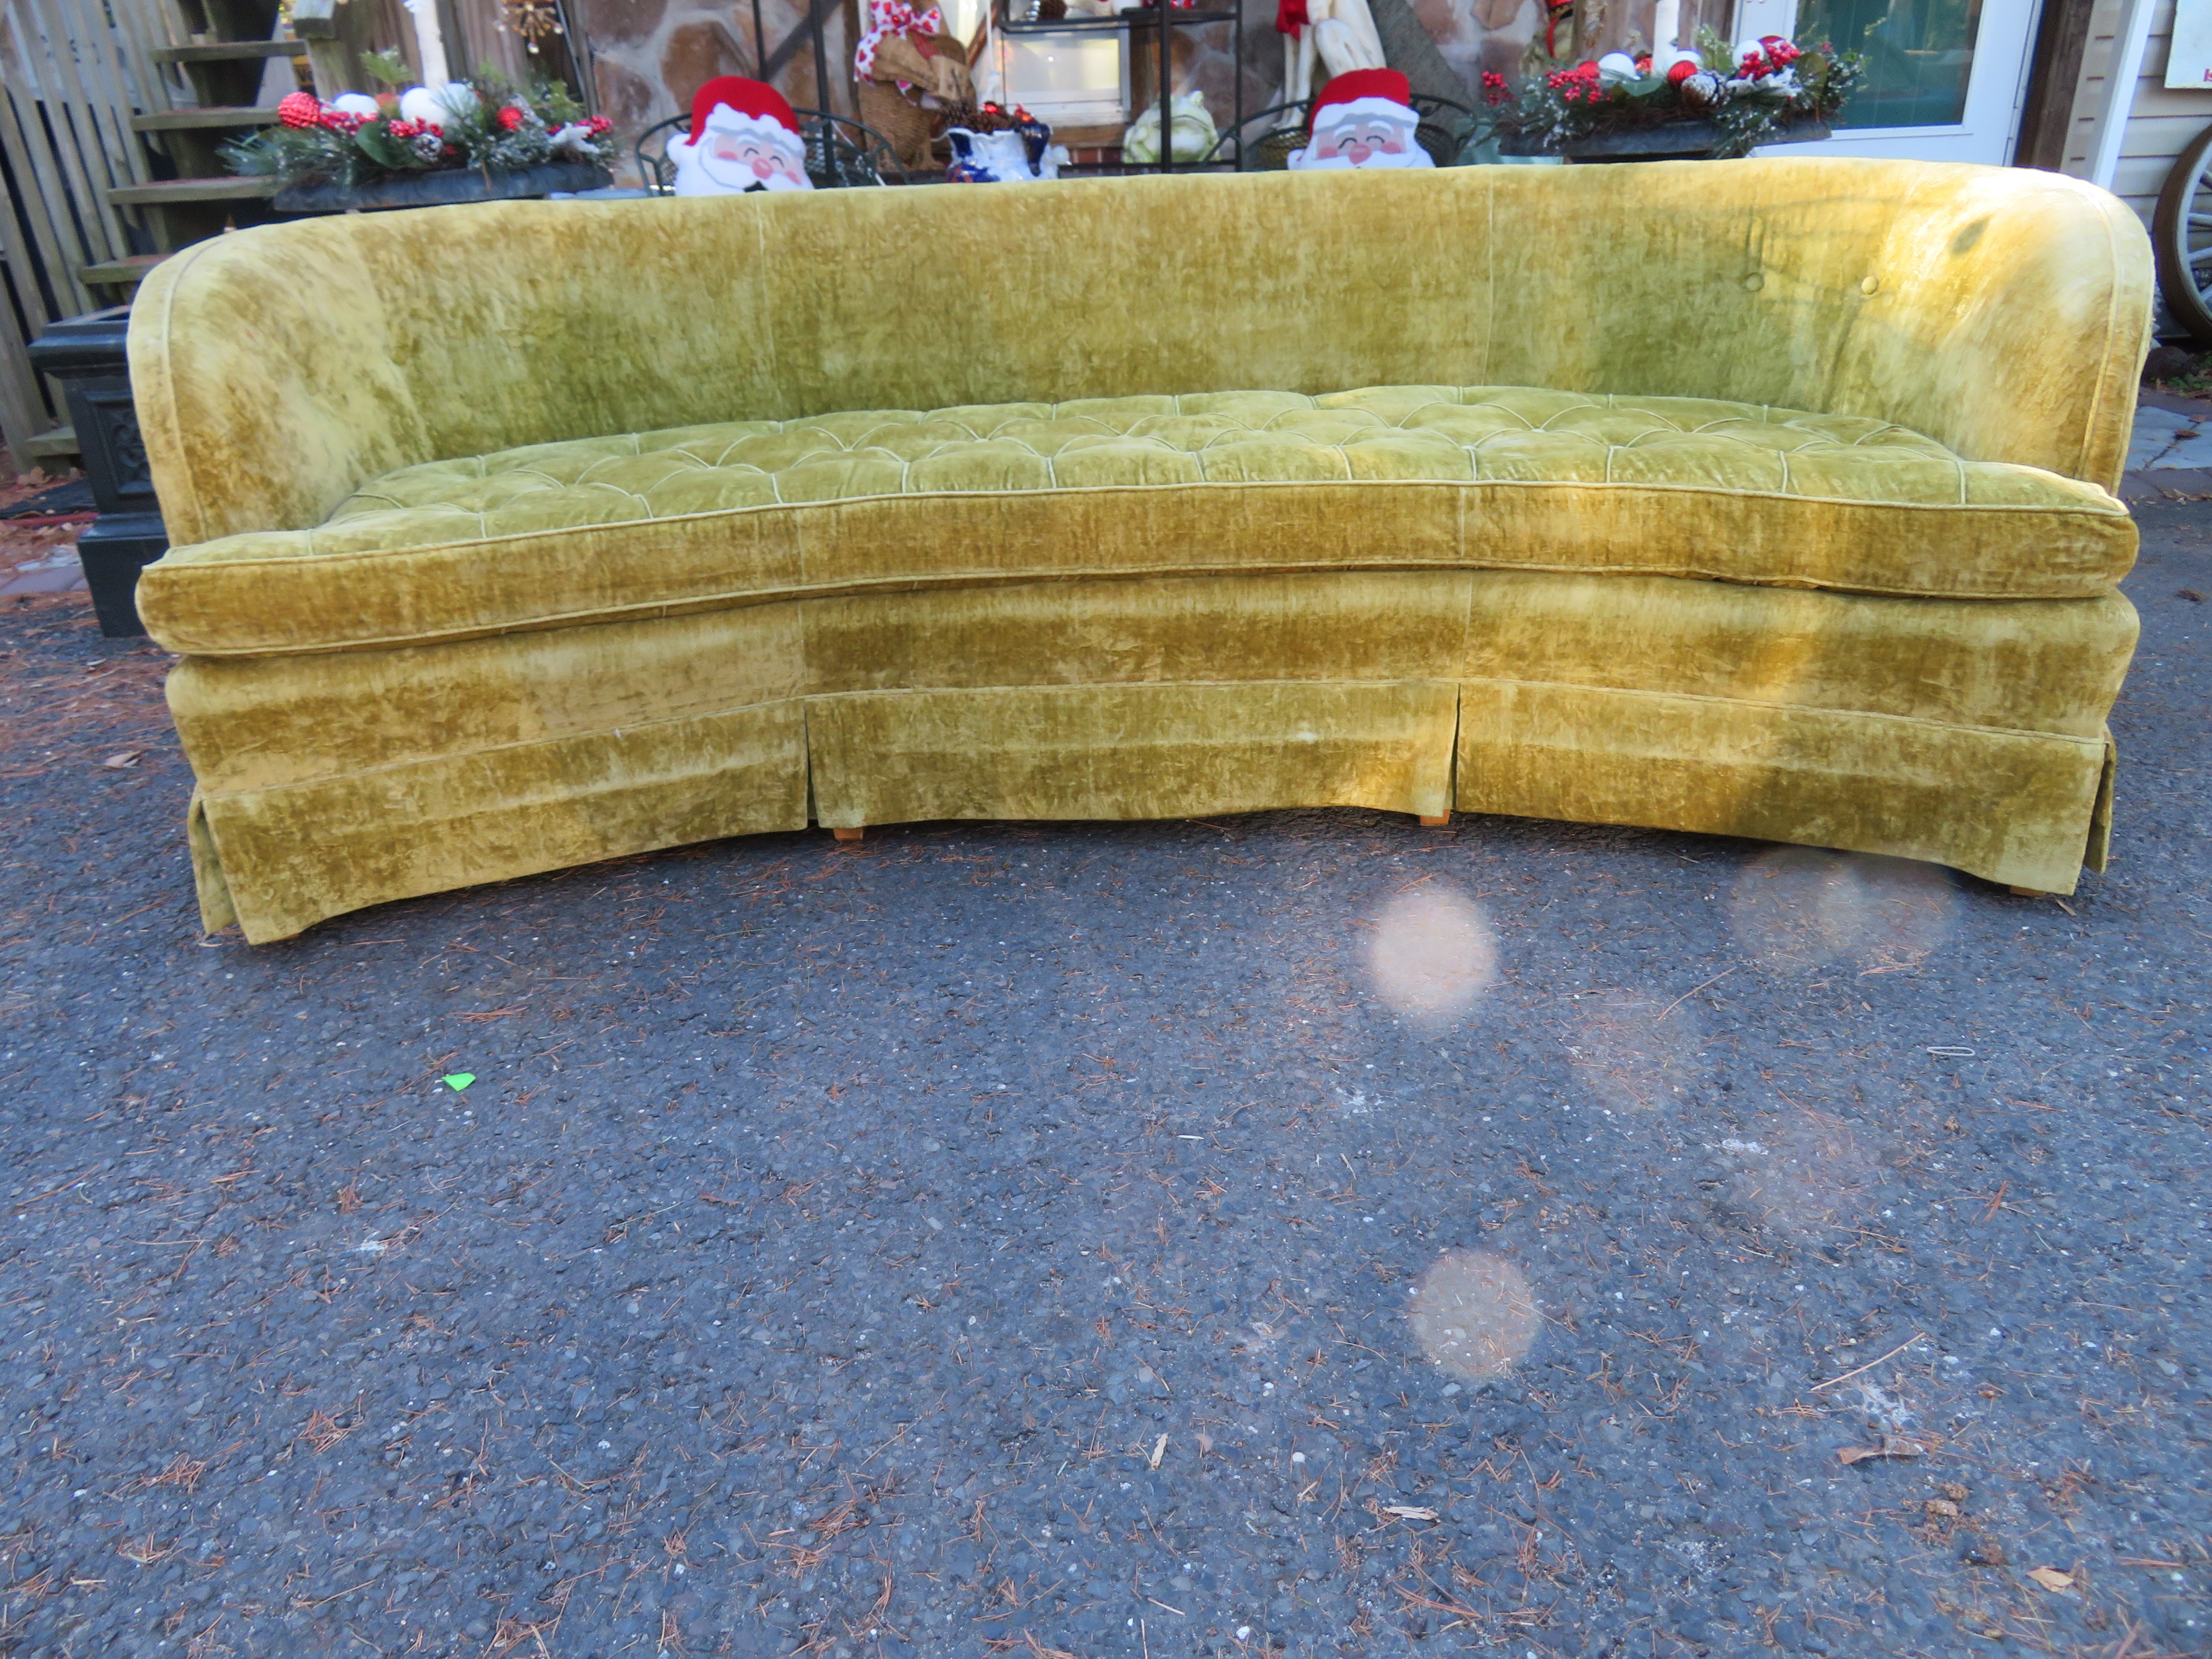 Classic Hollywood Regency Dorothy Draper for Heritage curved sofa. A wonderful curvaceous back with tufted cushioning and a curtained front bottom edge. This sofa retains its original velvet fabric and is in need of being reupholstered. The frame is